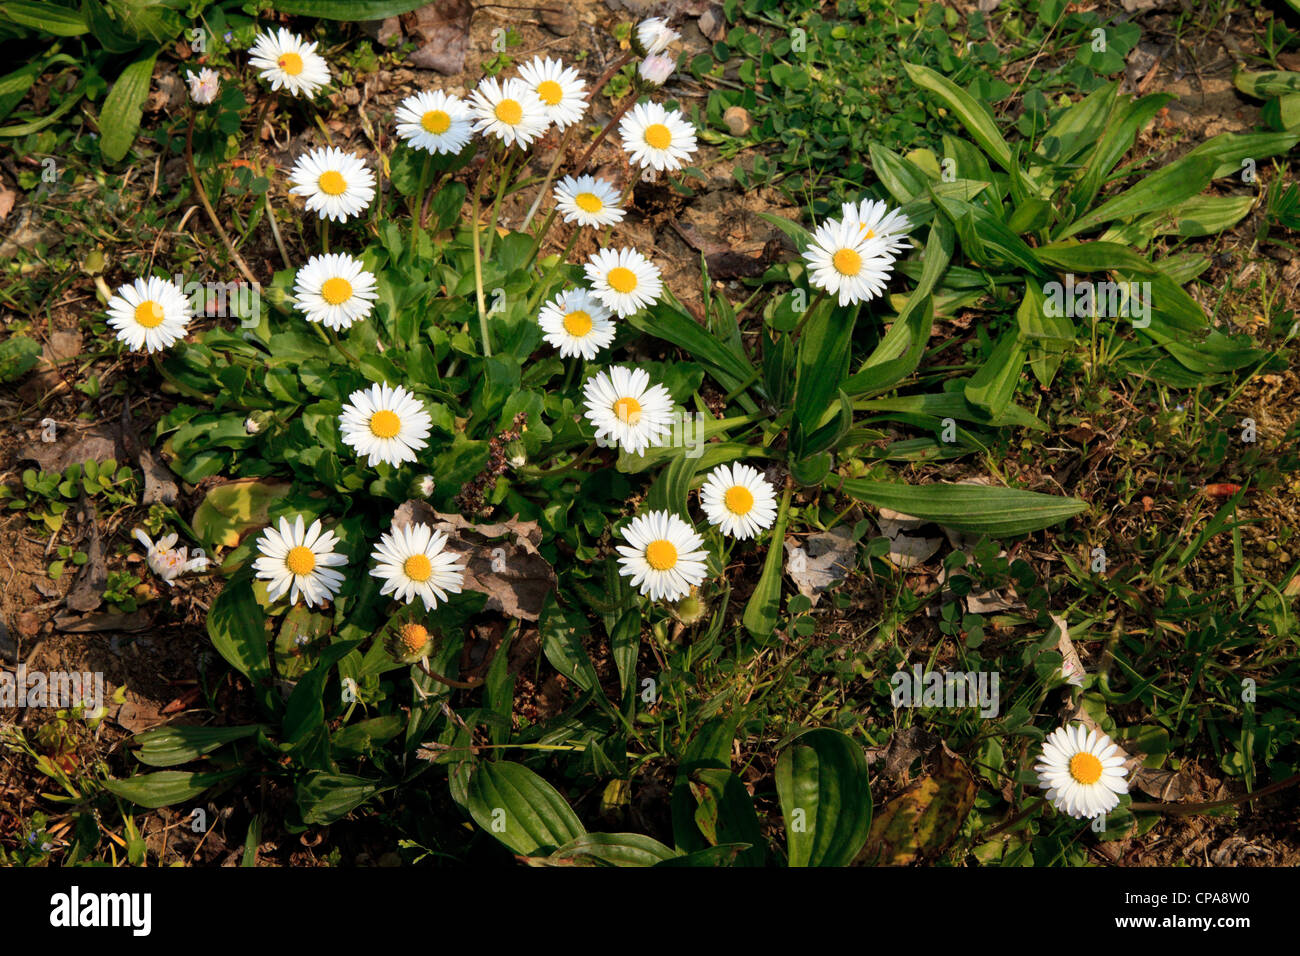 Daisies in Bloom Stock Photo